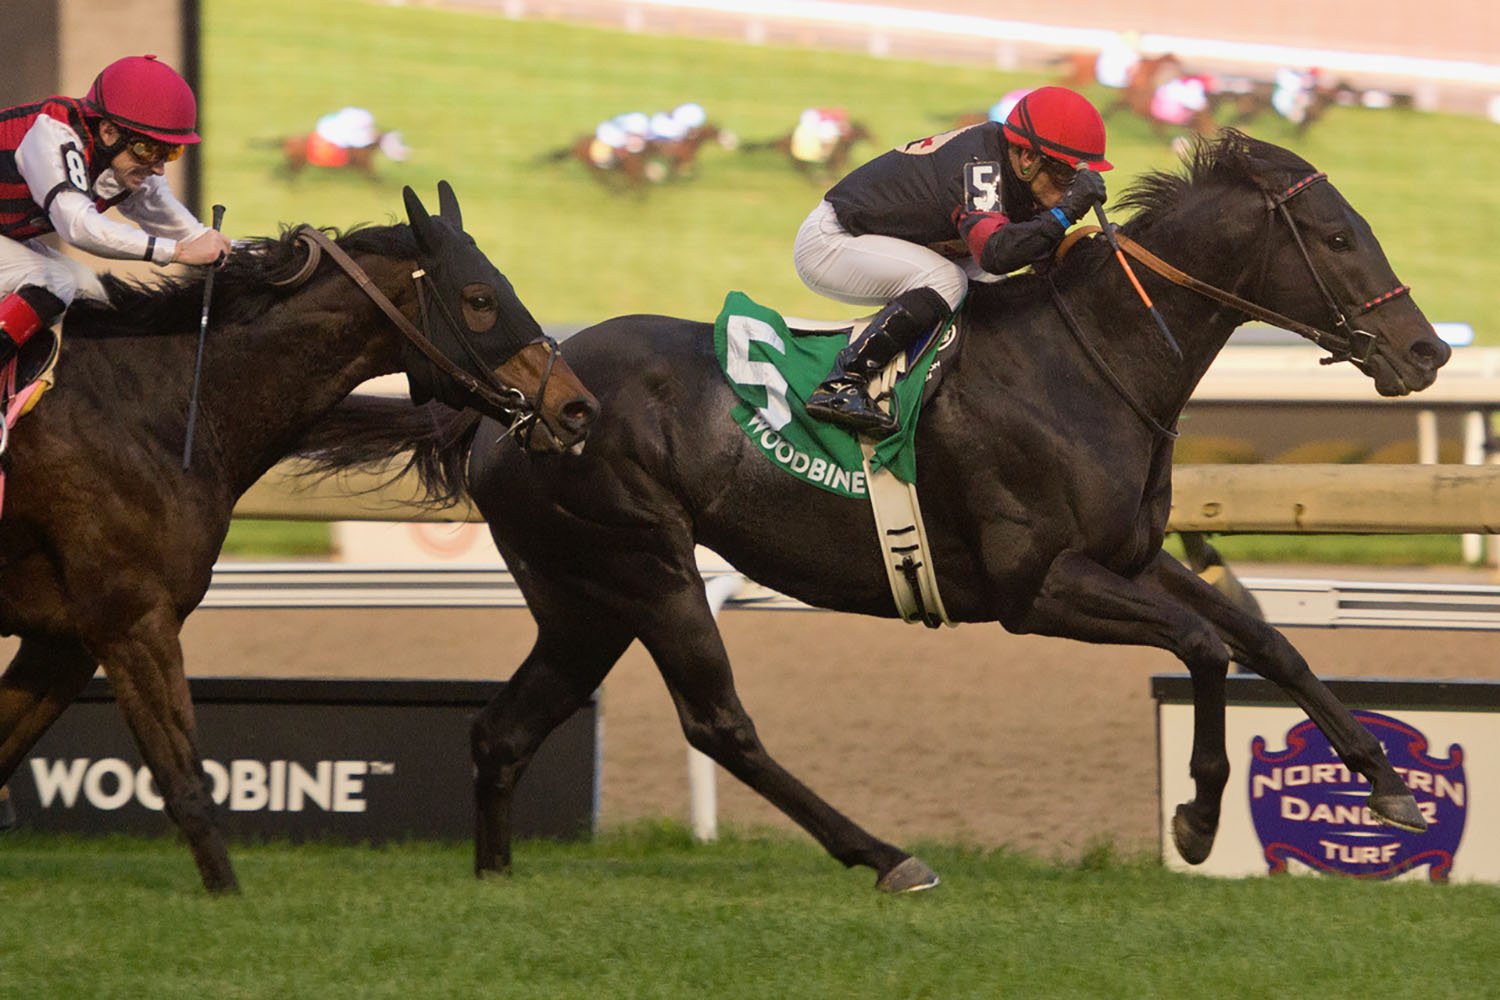 Silent Poet and jockey Justin Stein winning the $250,000 Nearctic Stakes (Grade 2) on Sunday, Oct. 18 at Woodbine Racetrack. (Michael Burns Photo)